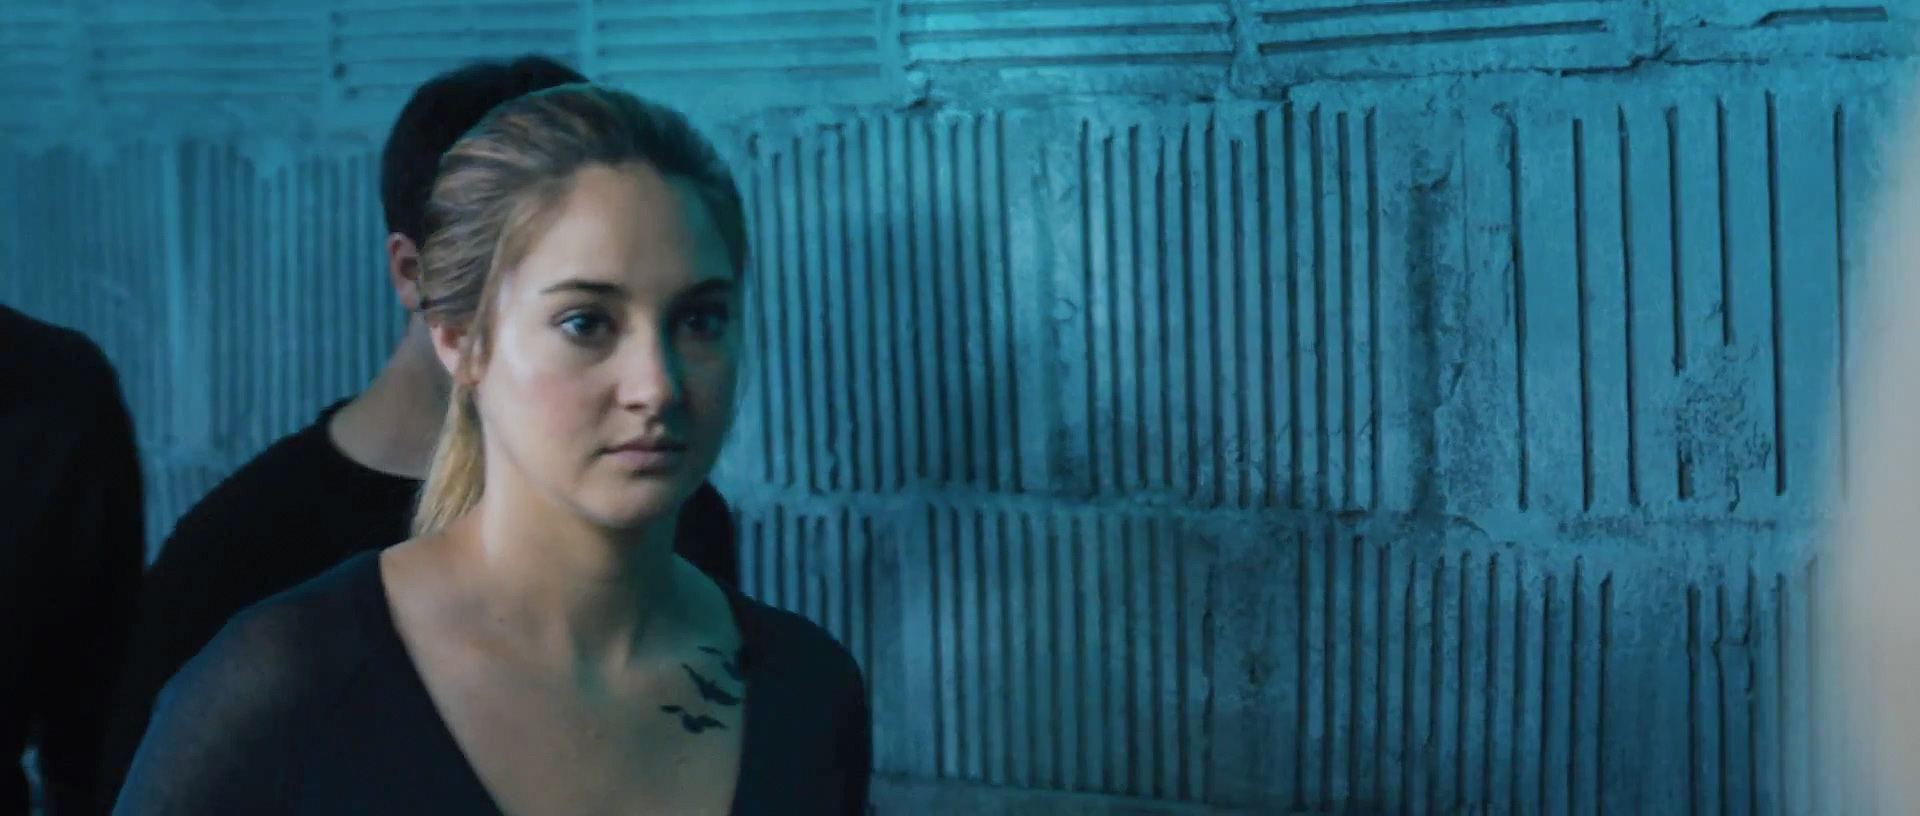 first-official-footage-from-the-futuristic-action-film-divergent-3.jpg